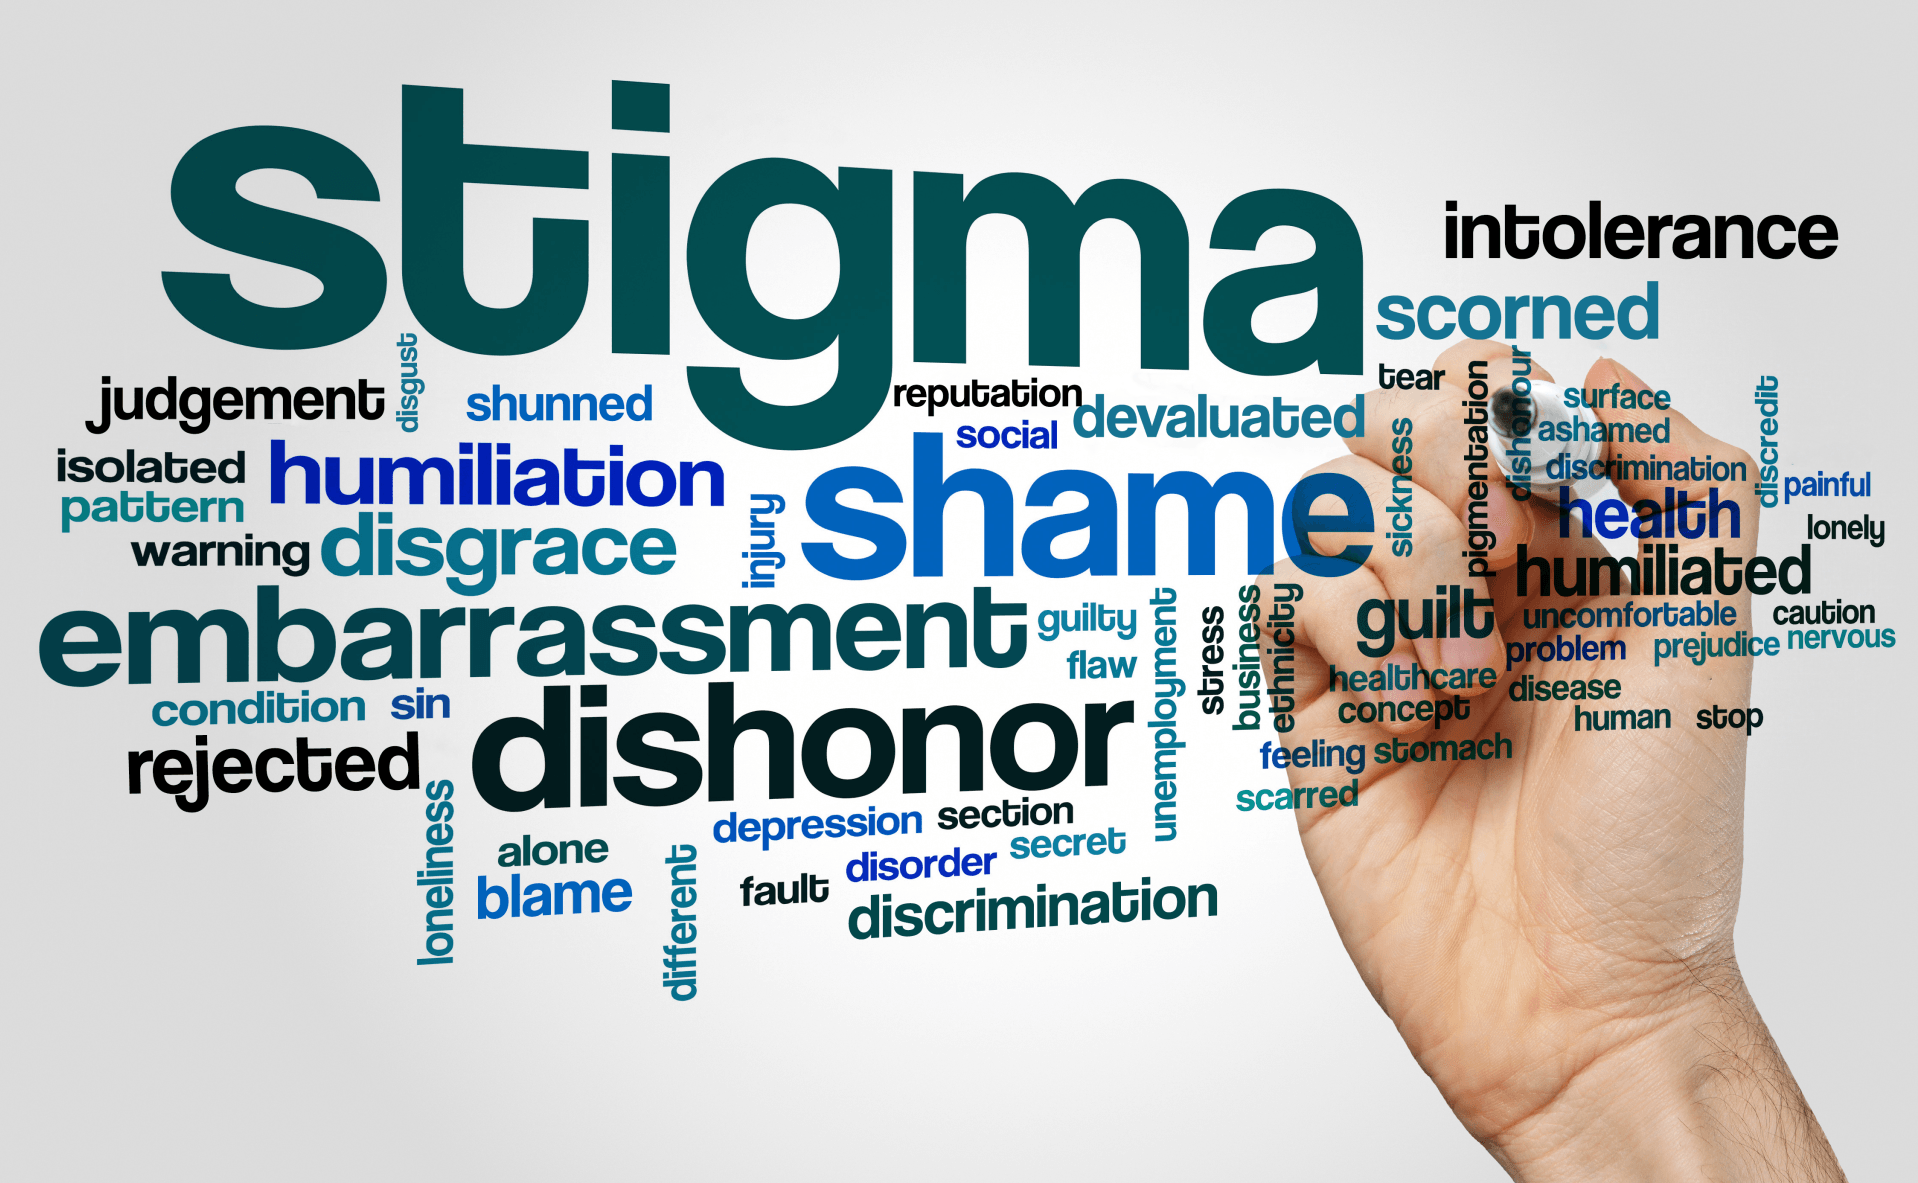 a hand writing words associated with stigma